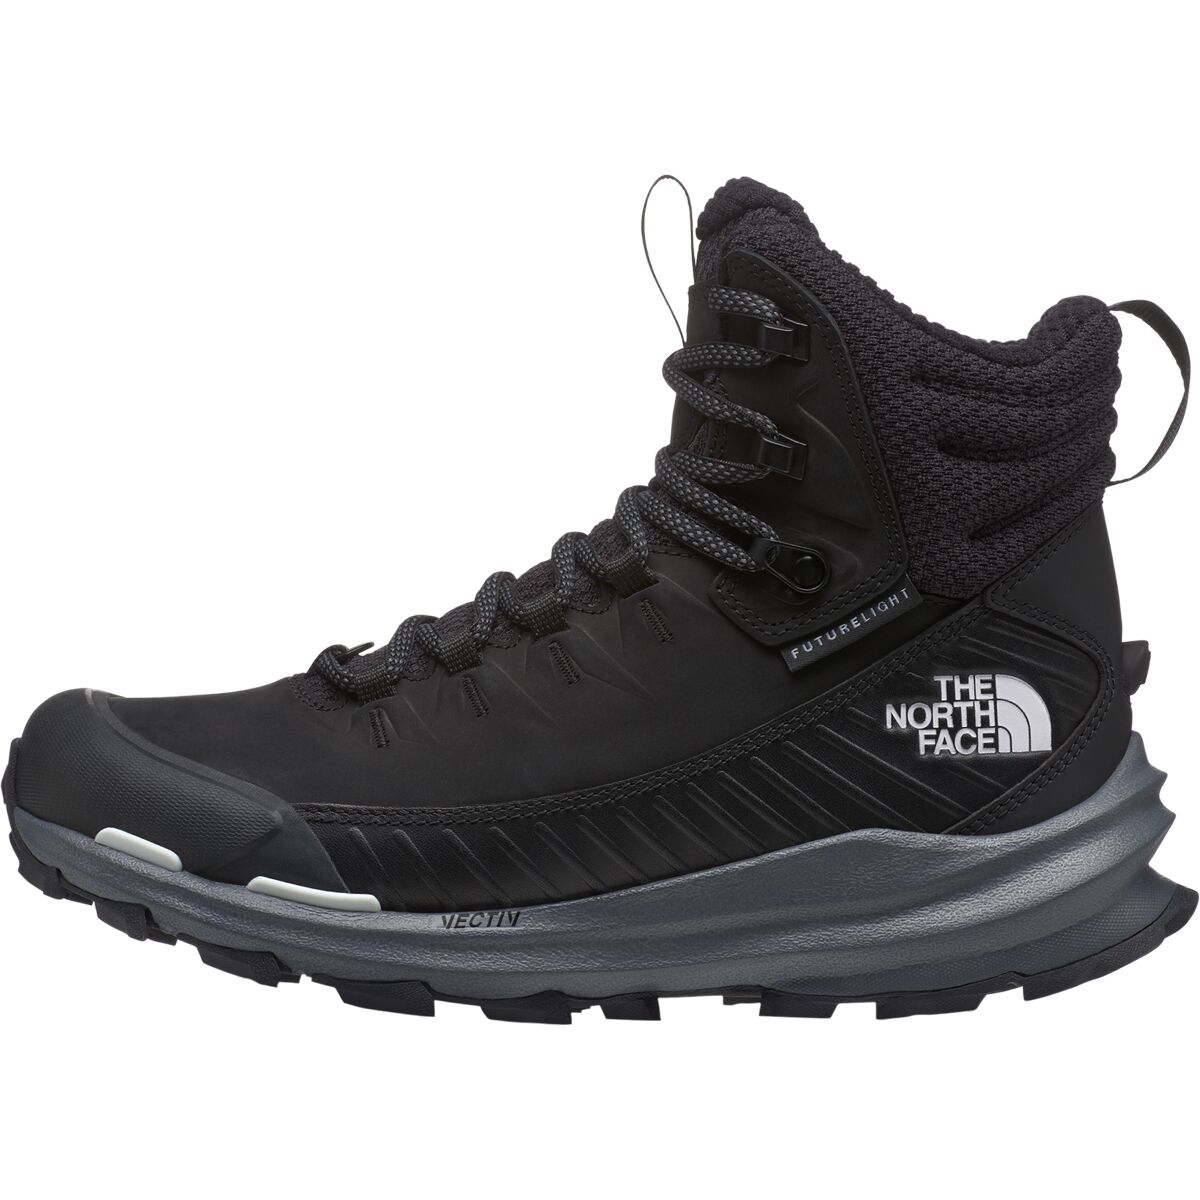 The North Face VECTIV Fastpack Insulated FUTURELIGHT Boot - Women's